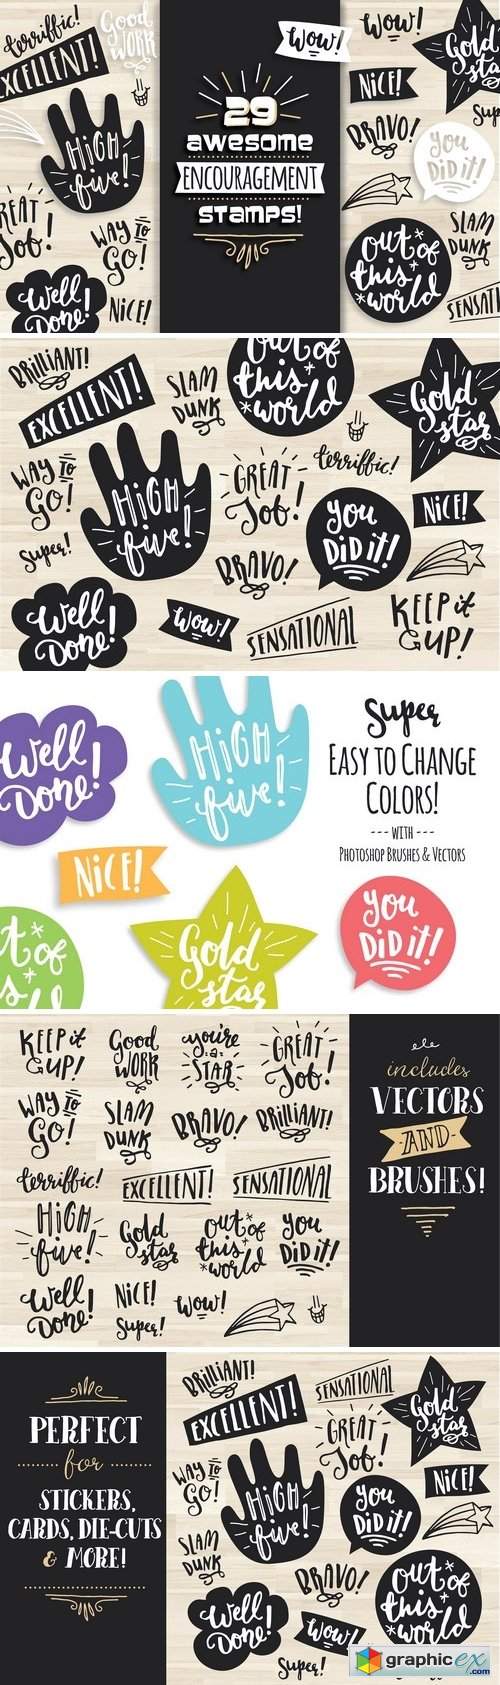 Awesome Encouragement Stamps!